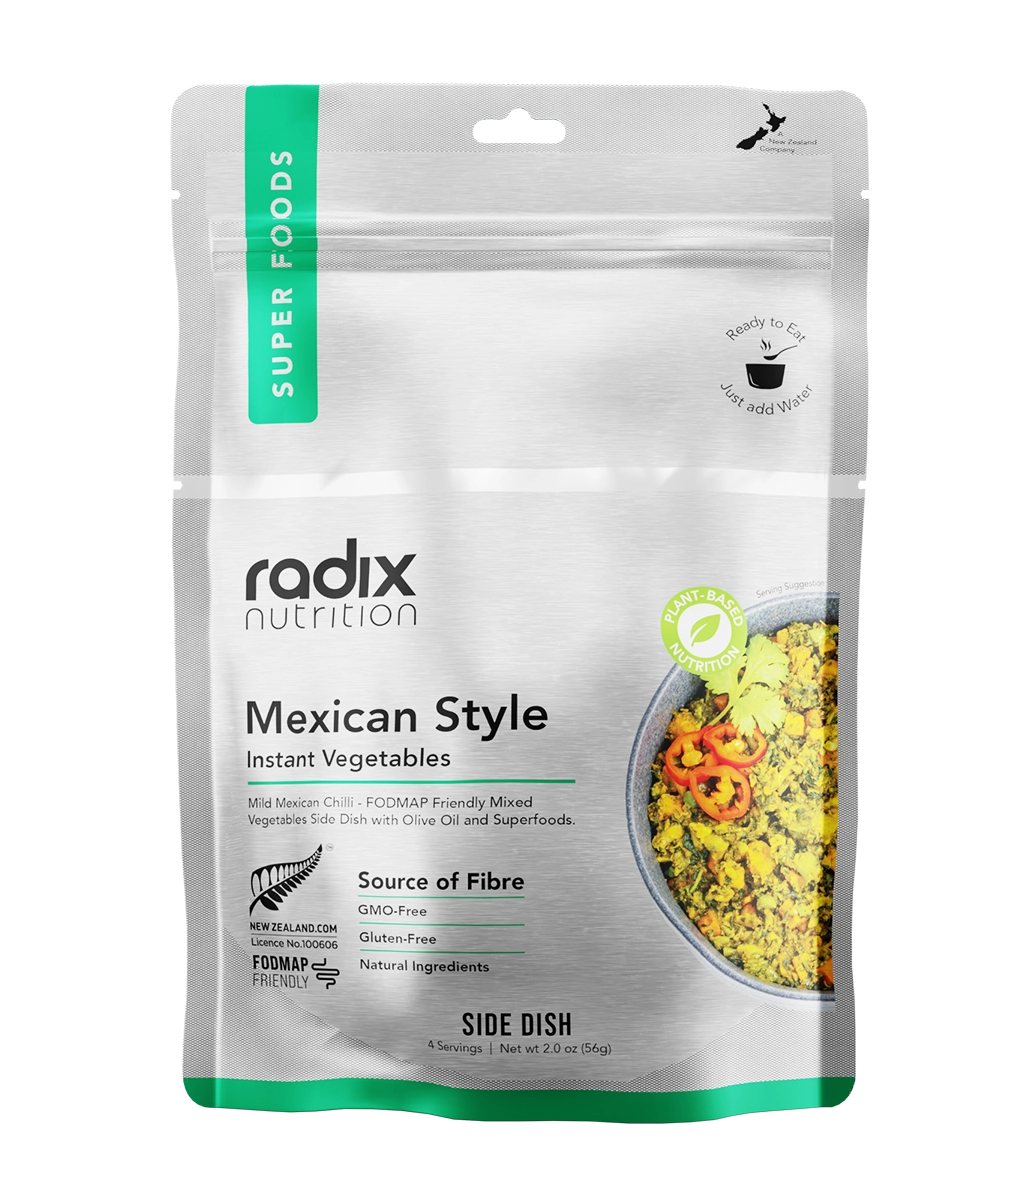 Radix Nutrition Instant Vegetable Mix Mexican Style